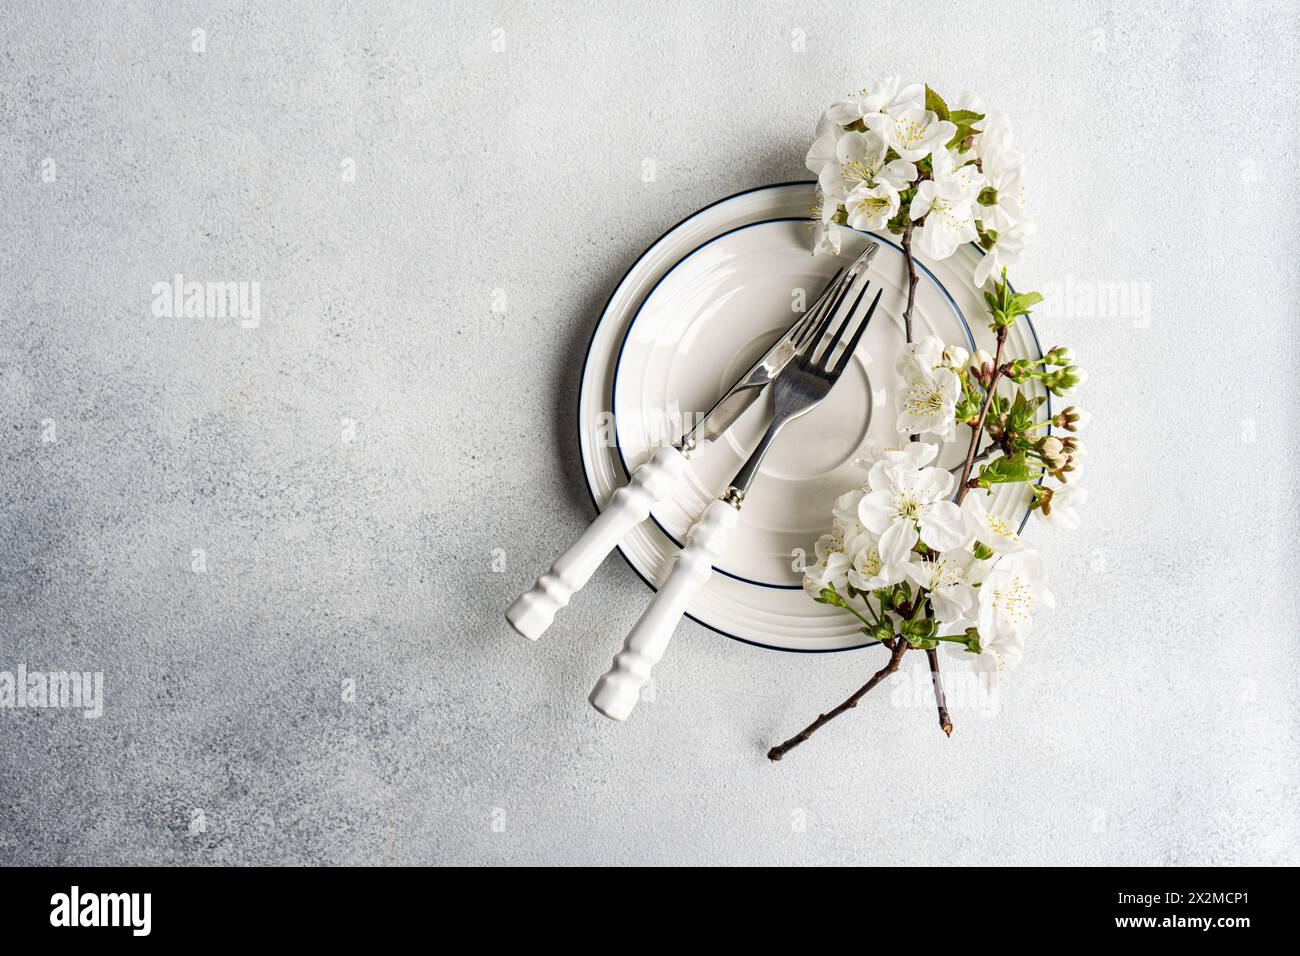 Elegant spring table setting with white blossom branches and vintage-style cutlery on a textured grey background Stock Photo